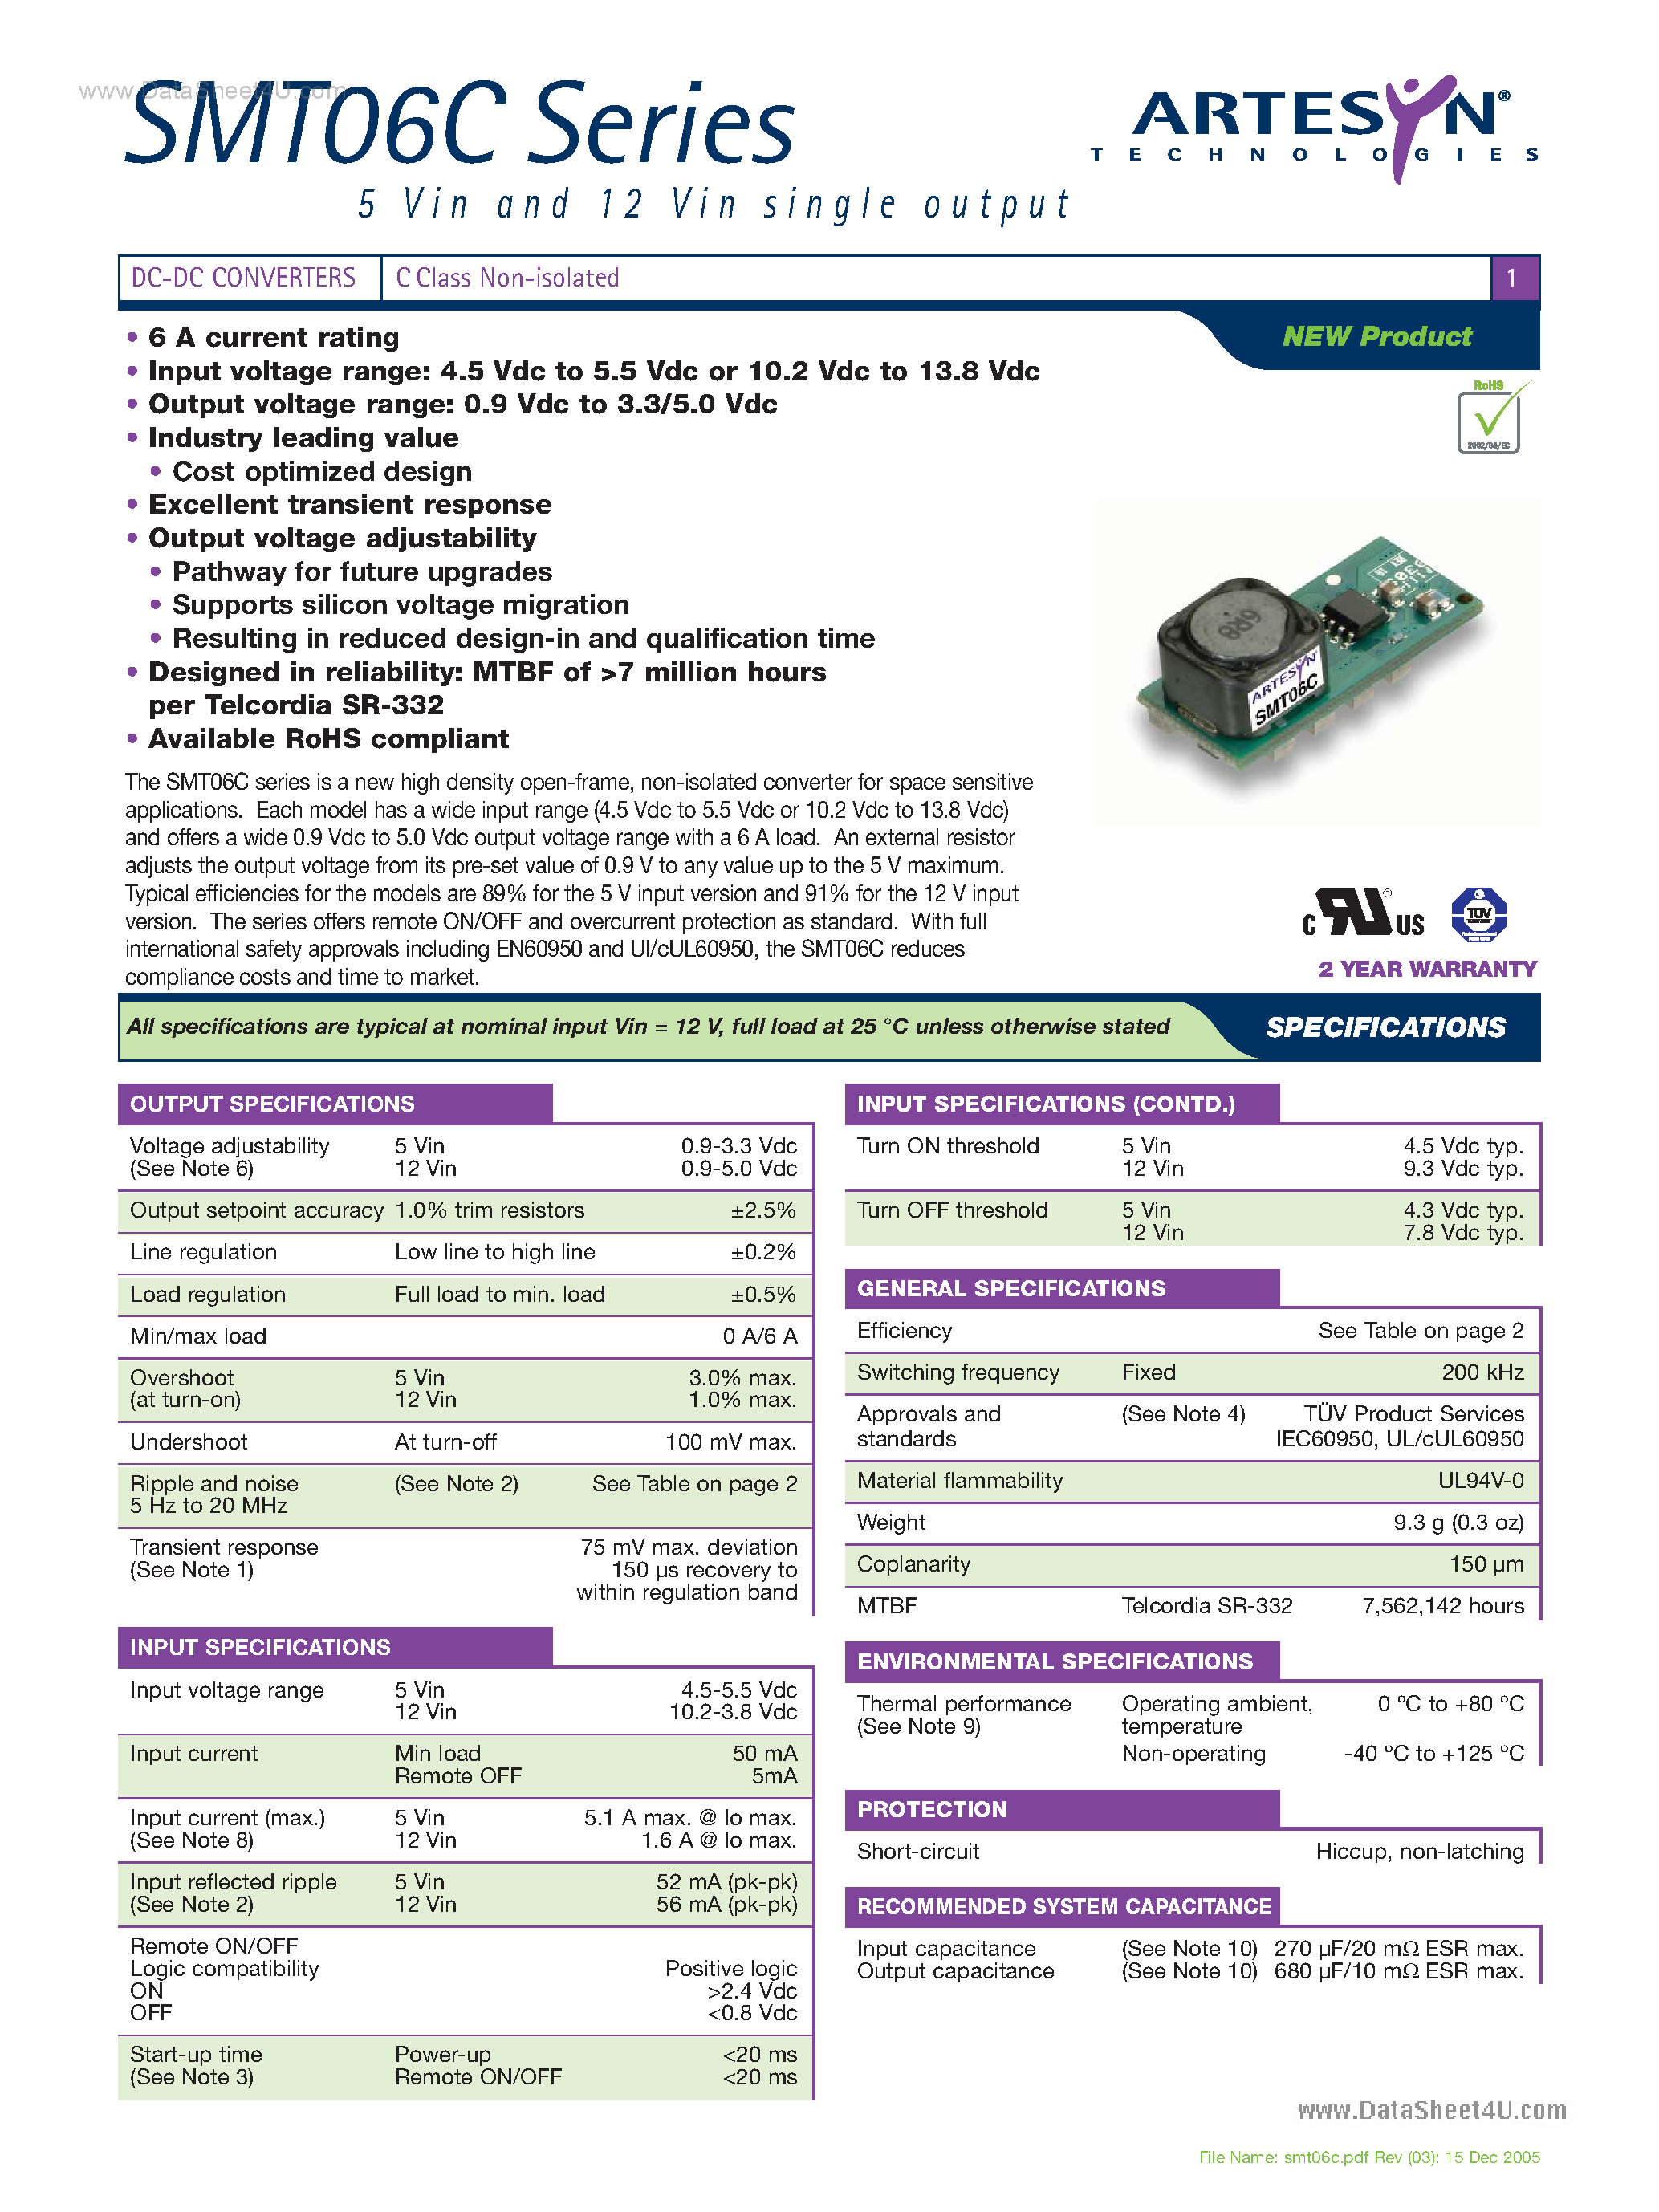 Datasheet SMT06C - DC-DC CONVERTERS C Class Non-isolated page 1